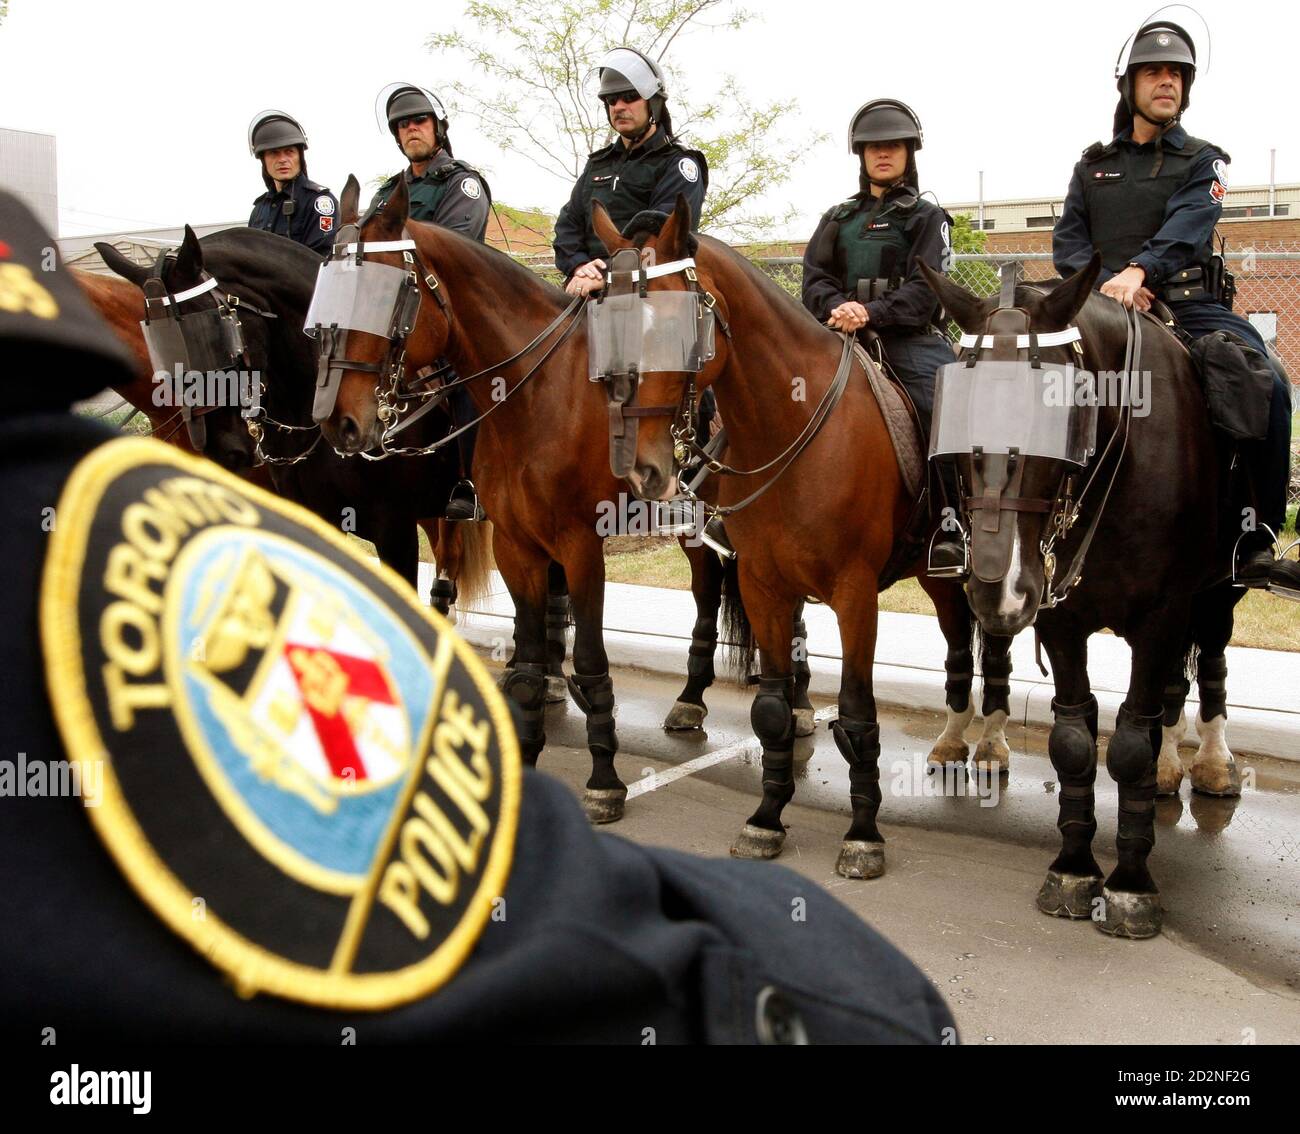 Members of the Toronto Police Mounted Unit which will provide security during the upcoming G8 and G20 Summits in Ontario are shown during a Integrated Security Unit (ISU) technical briefing for media in Toronto June 3, 2010. The ISU a joint security team led by the Royal Canadian Mounted Police (RCMP) in partnership with the Toronto Police Service, the Ontario Provincial Police (OPP), the Canadian Forces and Peel Regional Police.      REUTERS/ Mike Cassese   (CANADA - Tags: CRIME LAW ANIMALS) Stock Photo